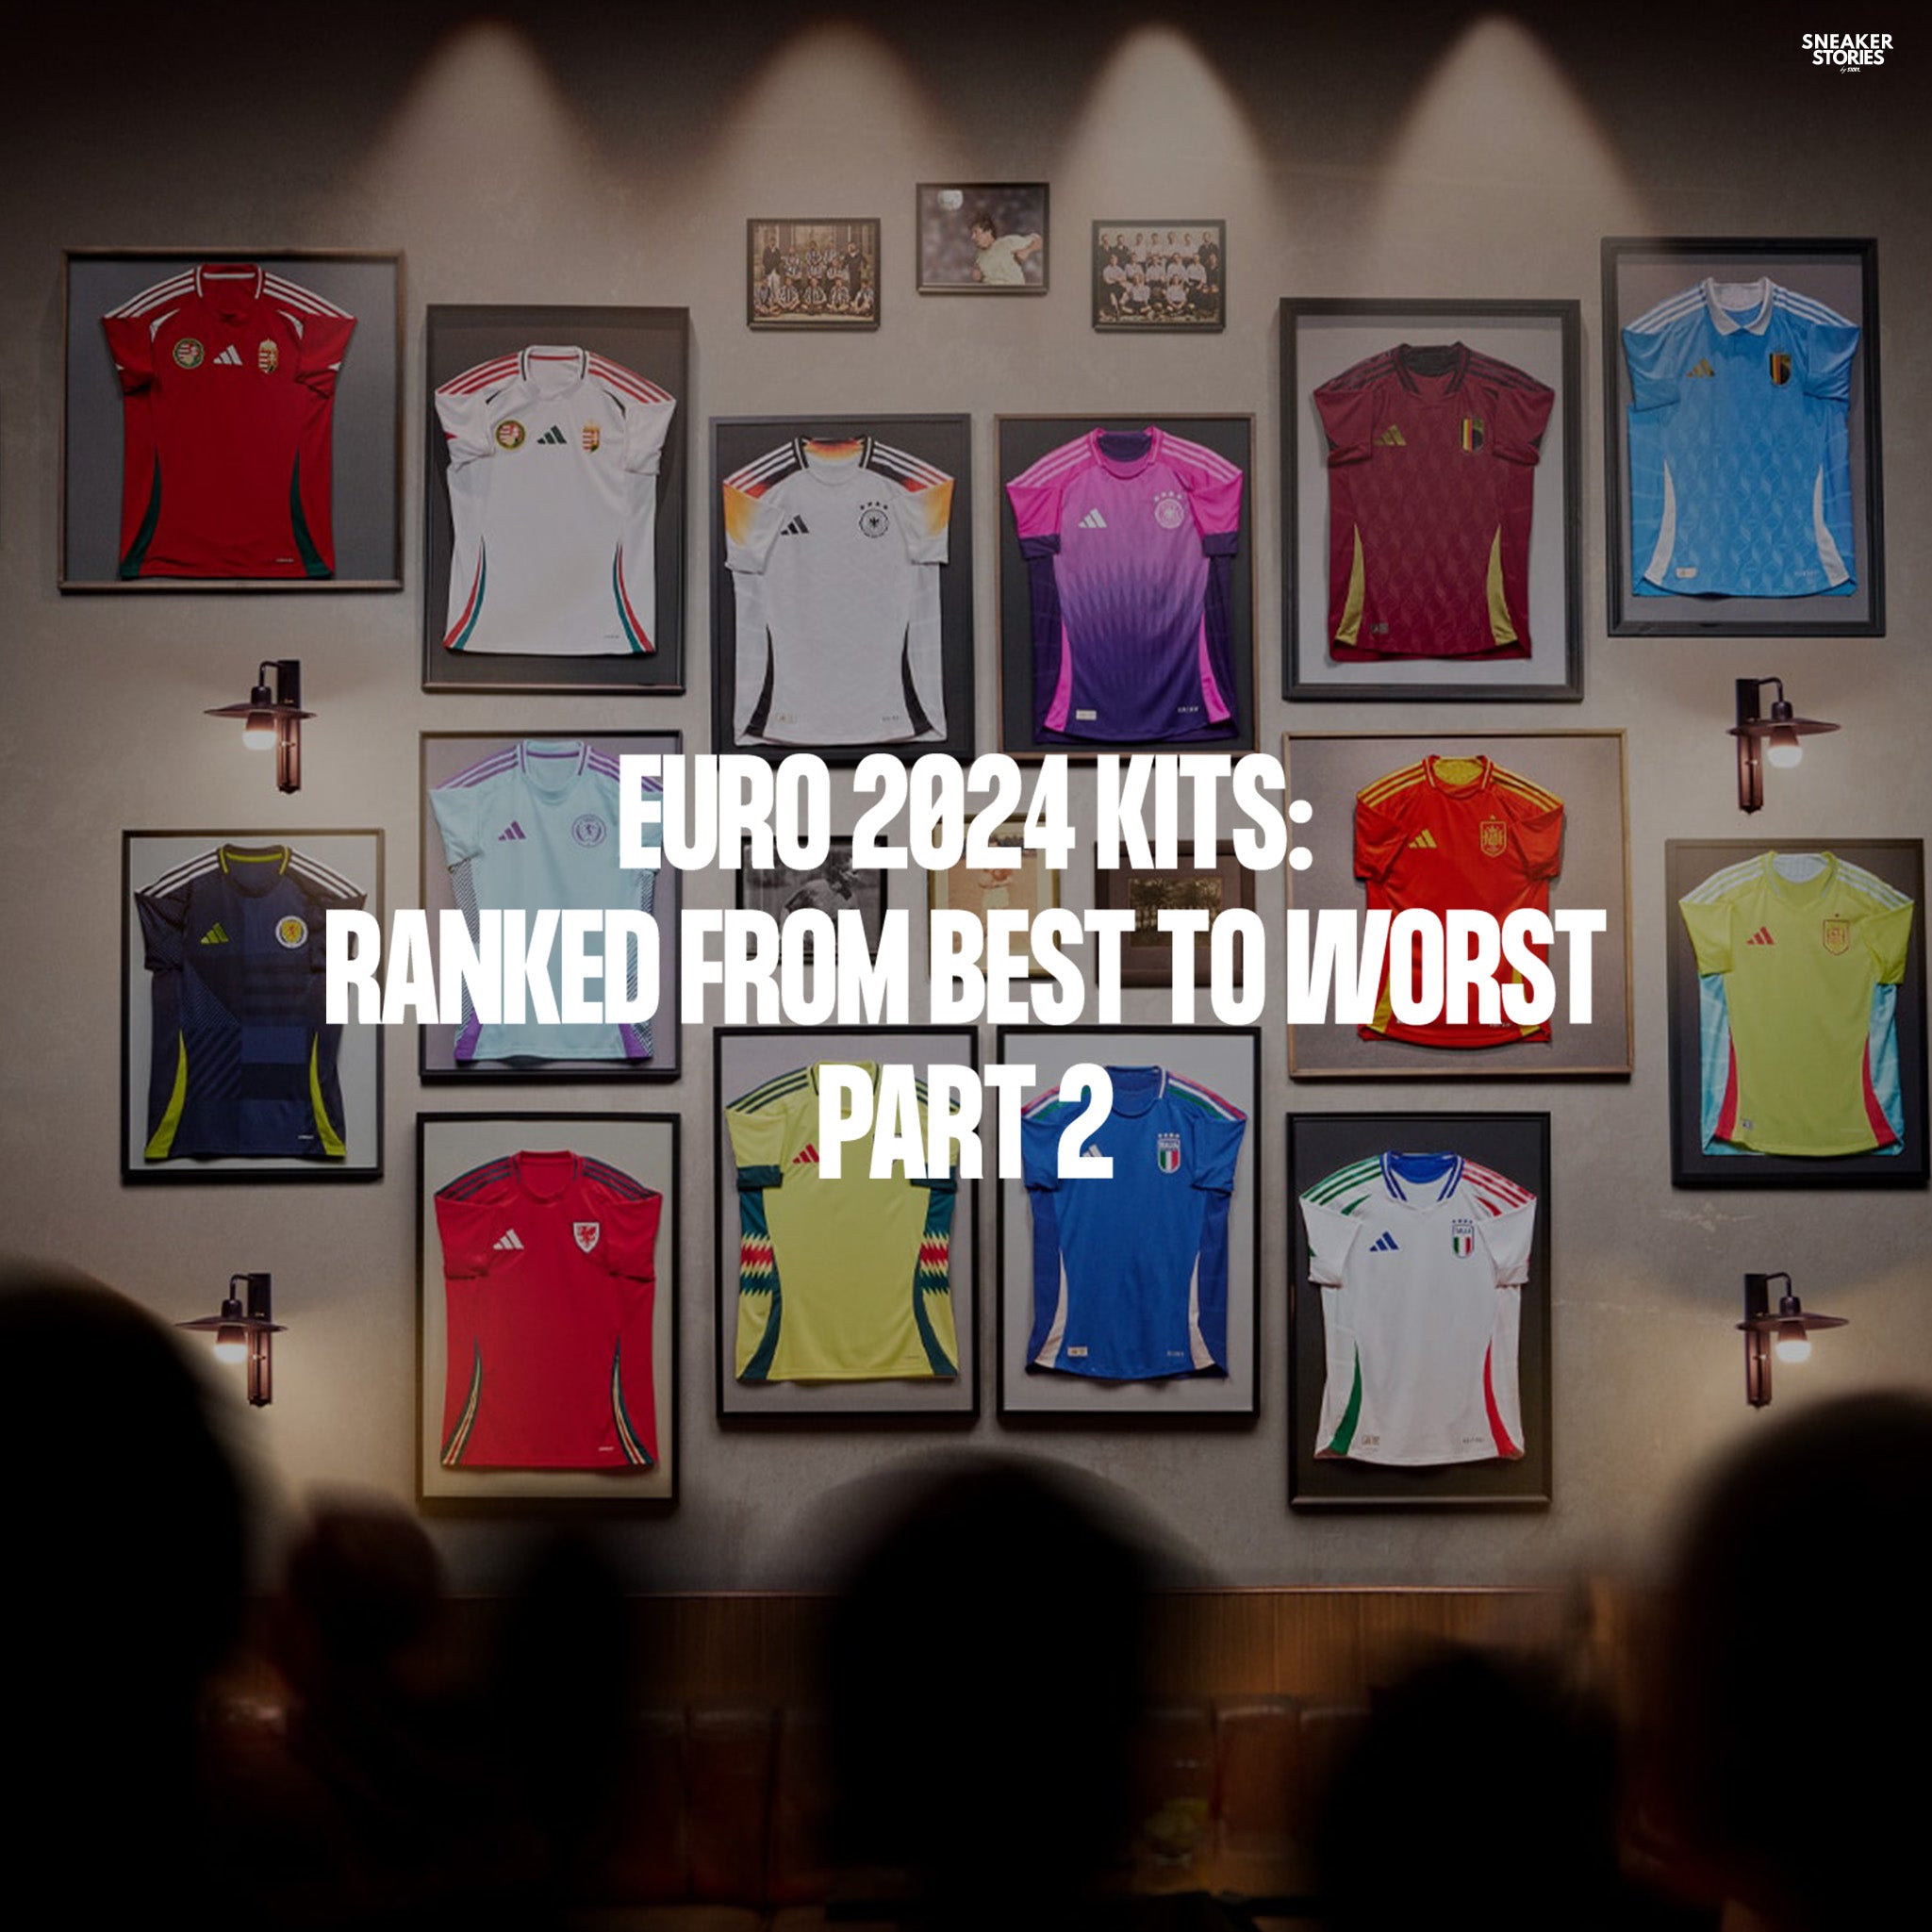 Euro 2024 kits: Ranked from best to worst  Part 2